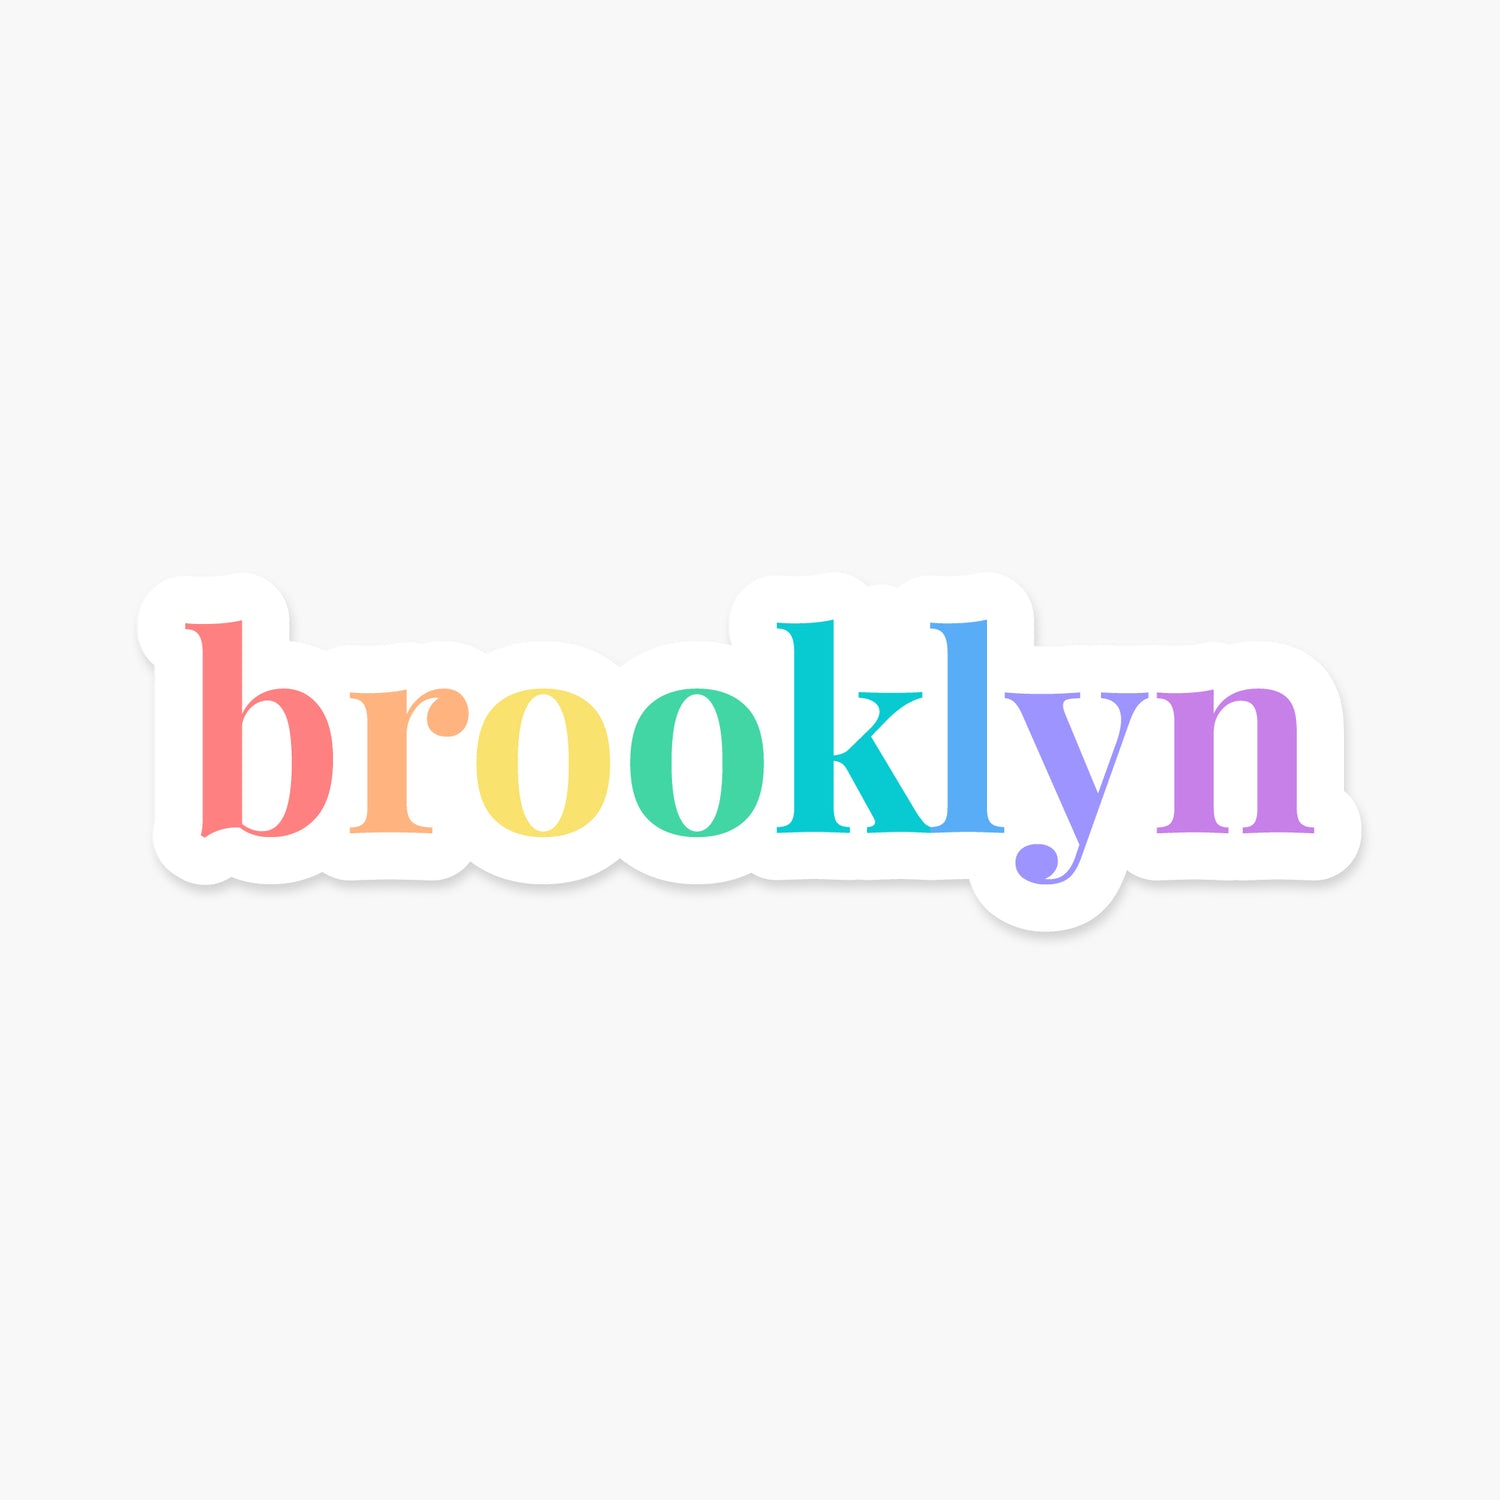 Brooklyn, New York - Everyday Sticker | Footnotes Paper